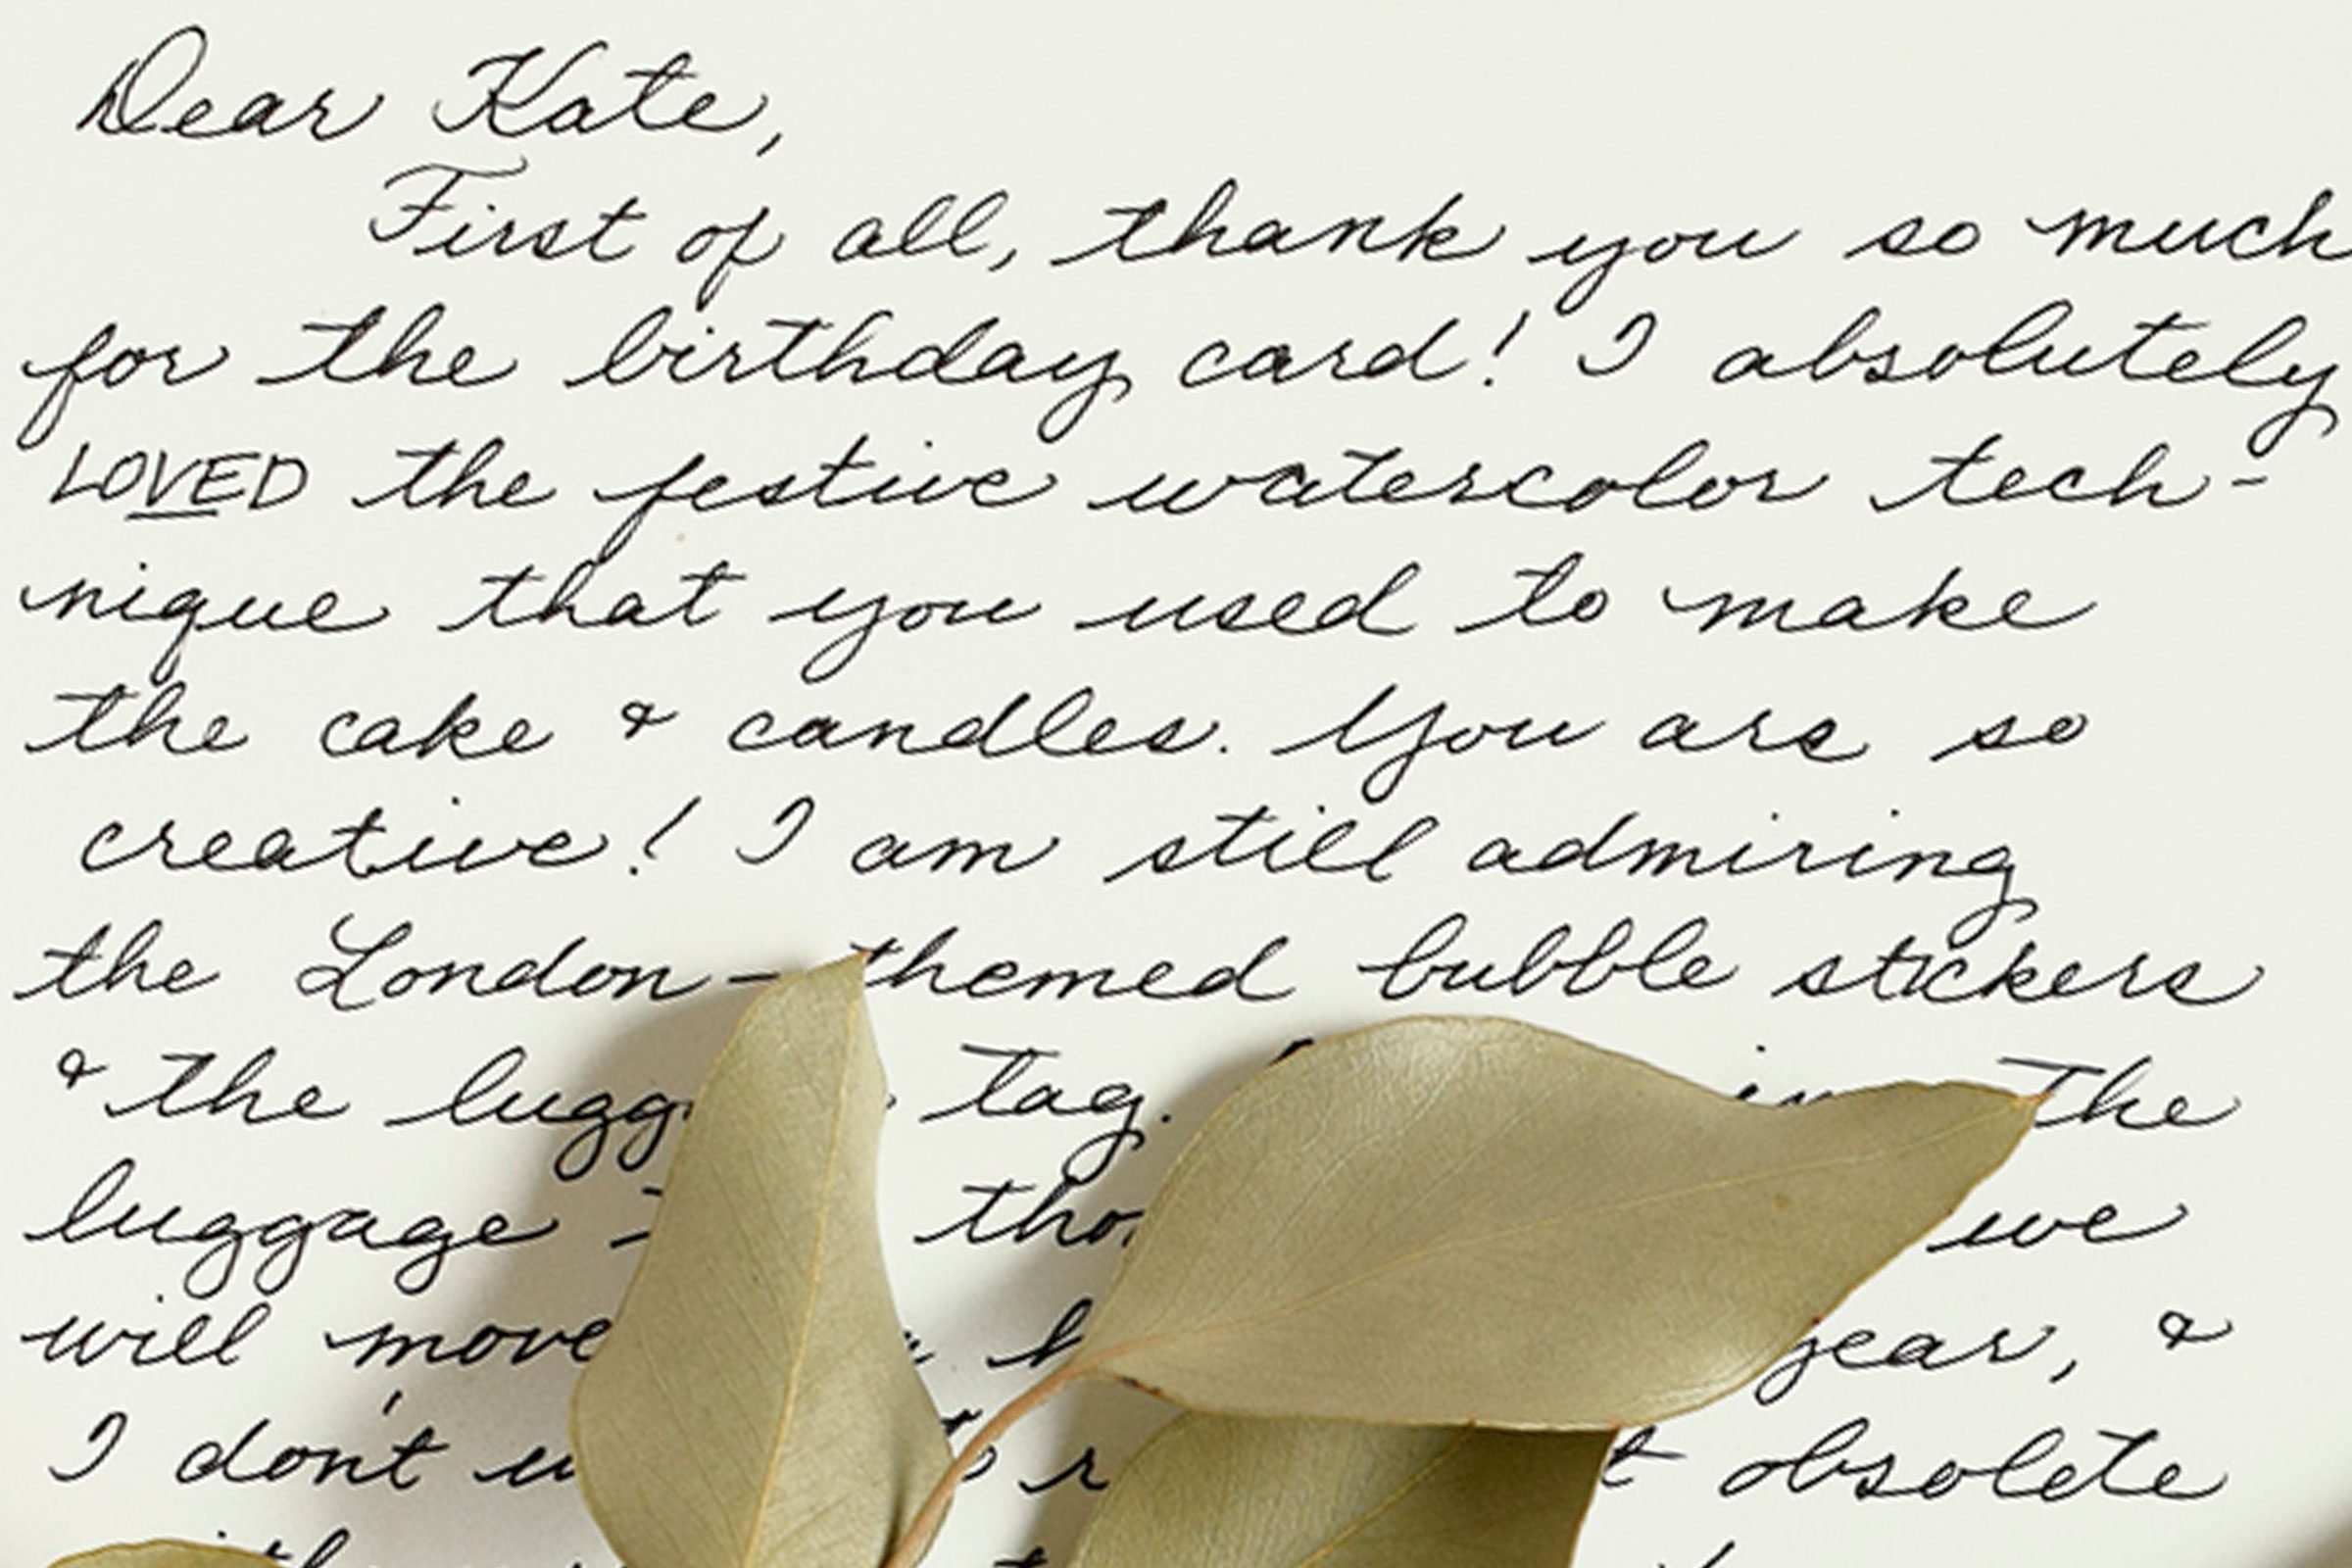 How to Have Neat Handwriting | Reader's Digest